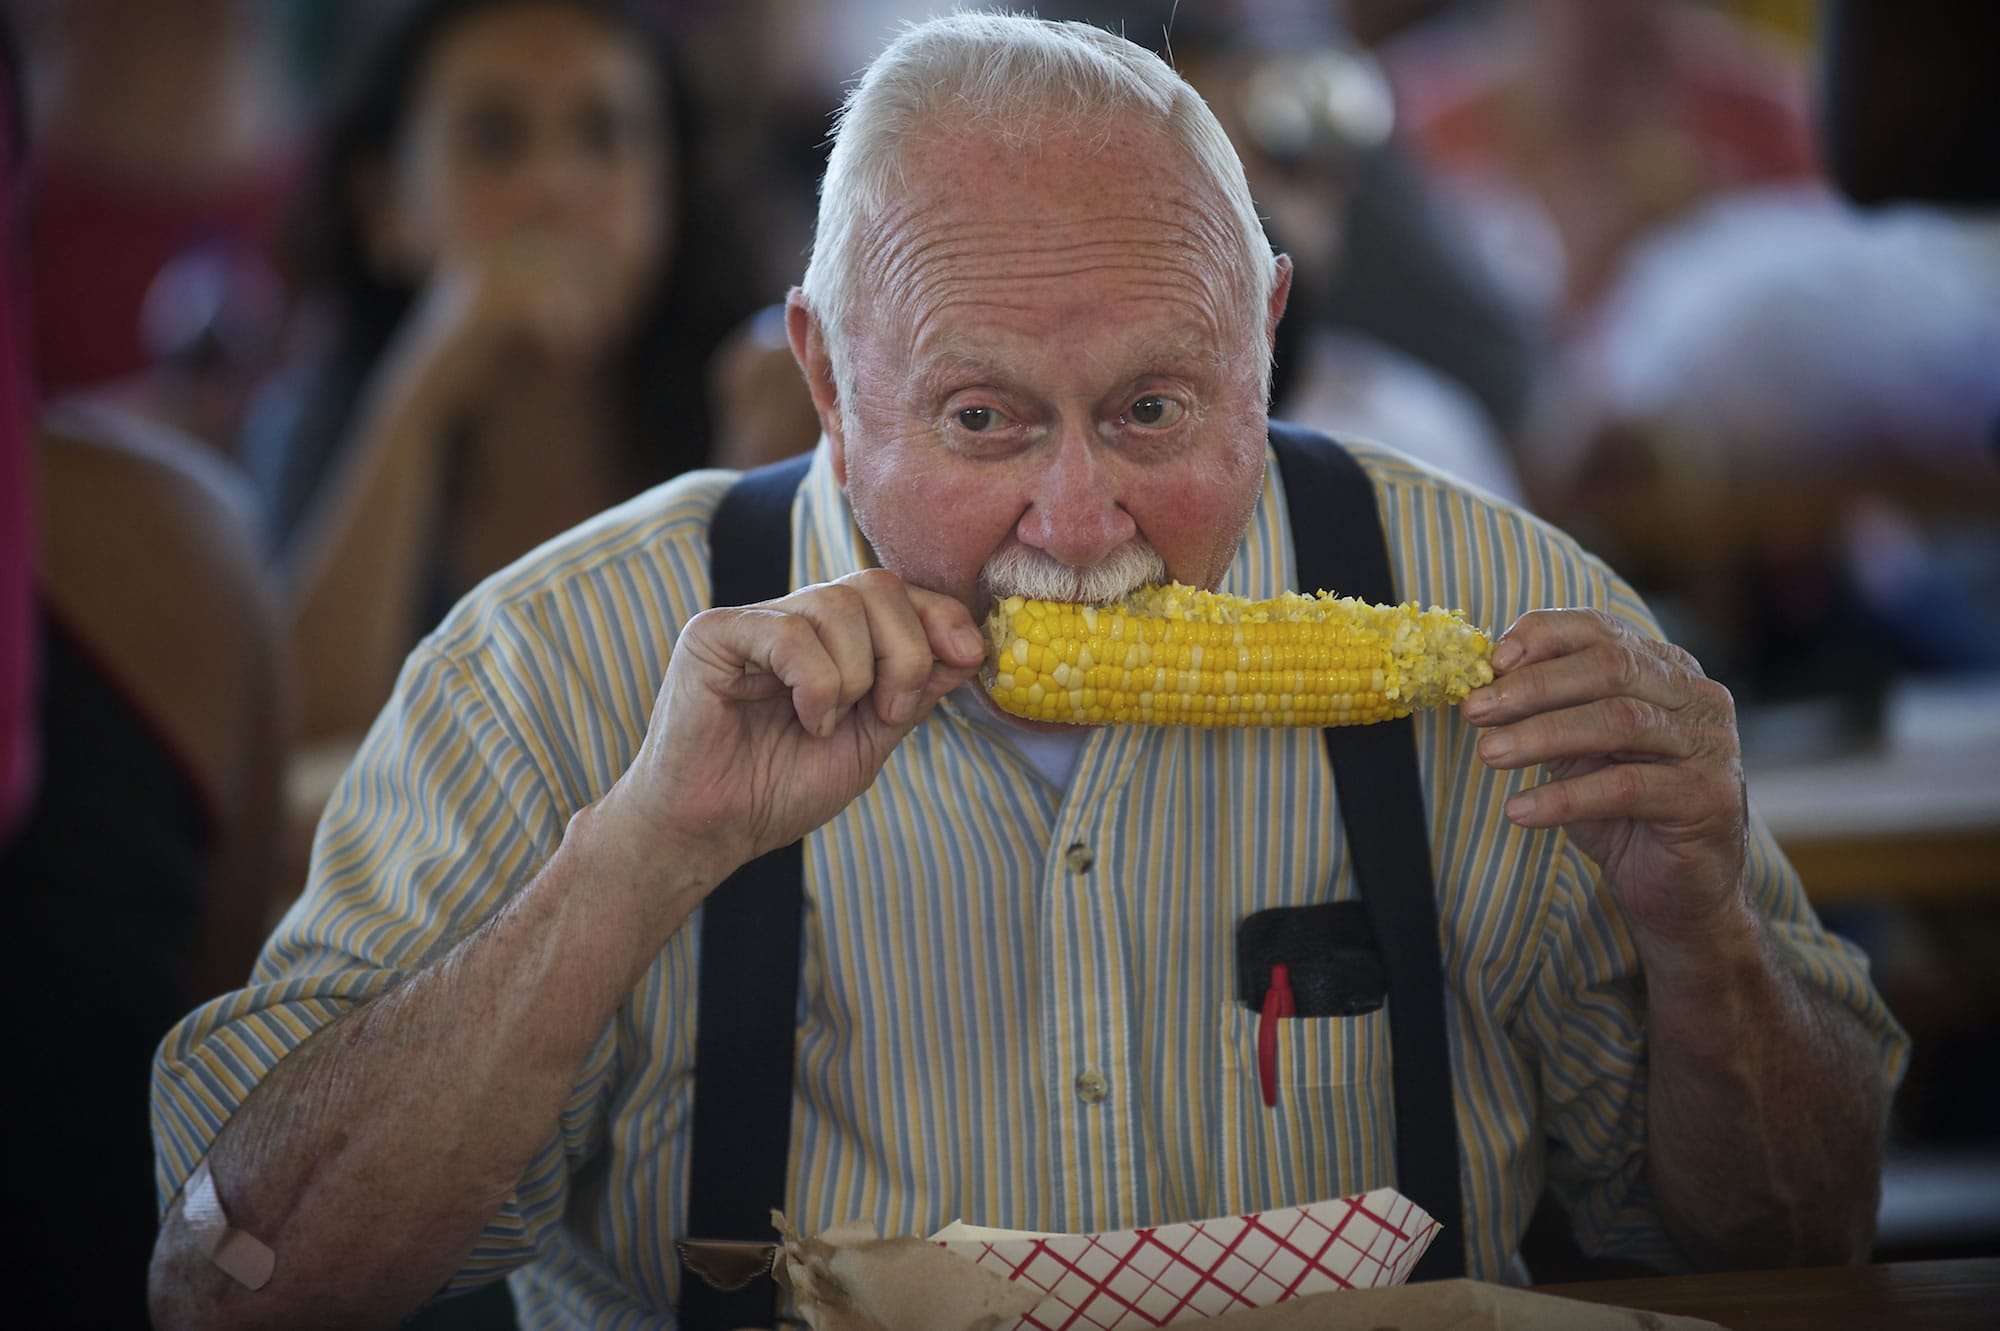 Bud Webster, 79, of La Center bites in to a cob of corn Saturday at the Sausage Fest at St. Joseph Catholic School.